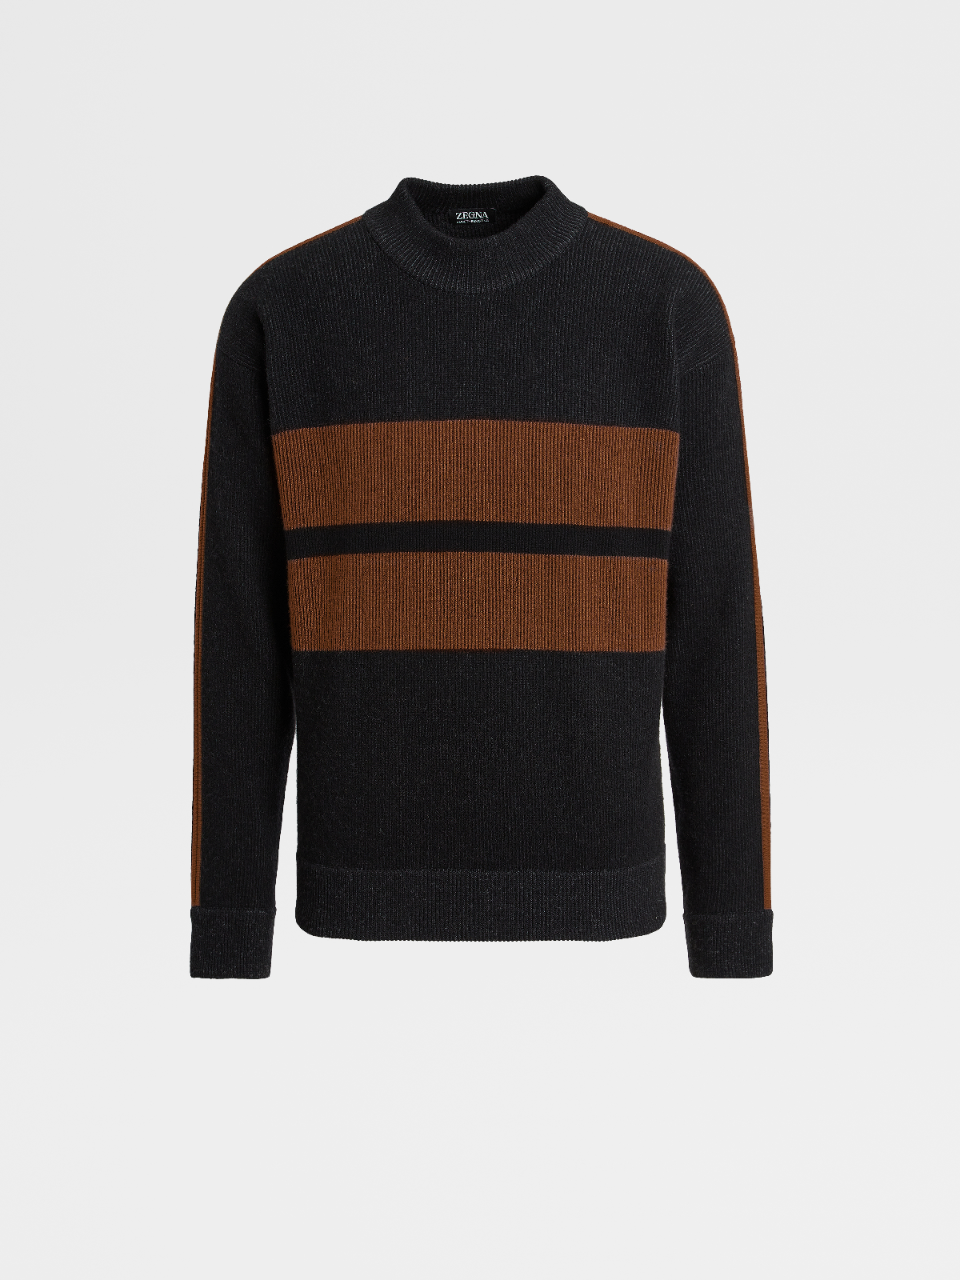 Black Striped #UseTheExisting™ Wool and Cashmere Blend Knit Crewneck Sweater